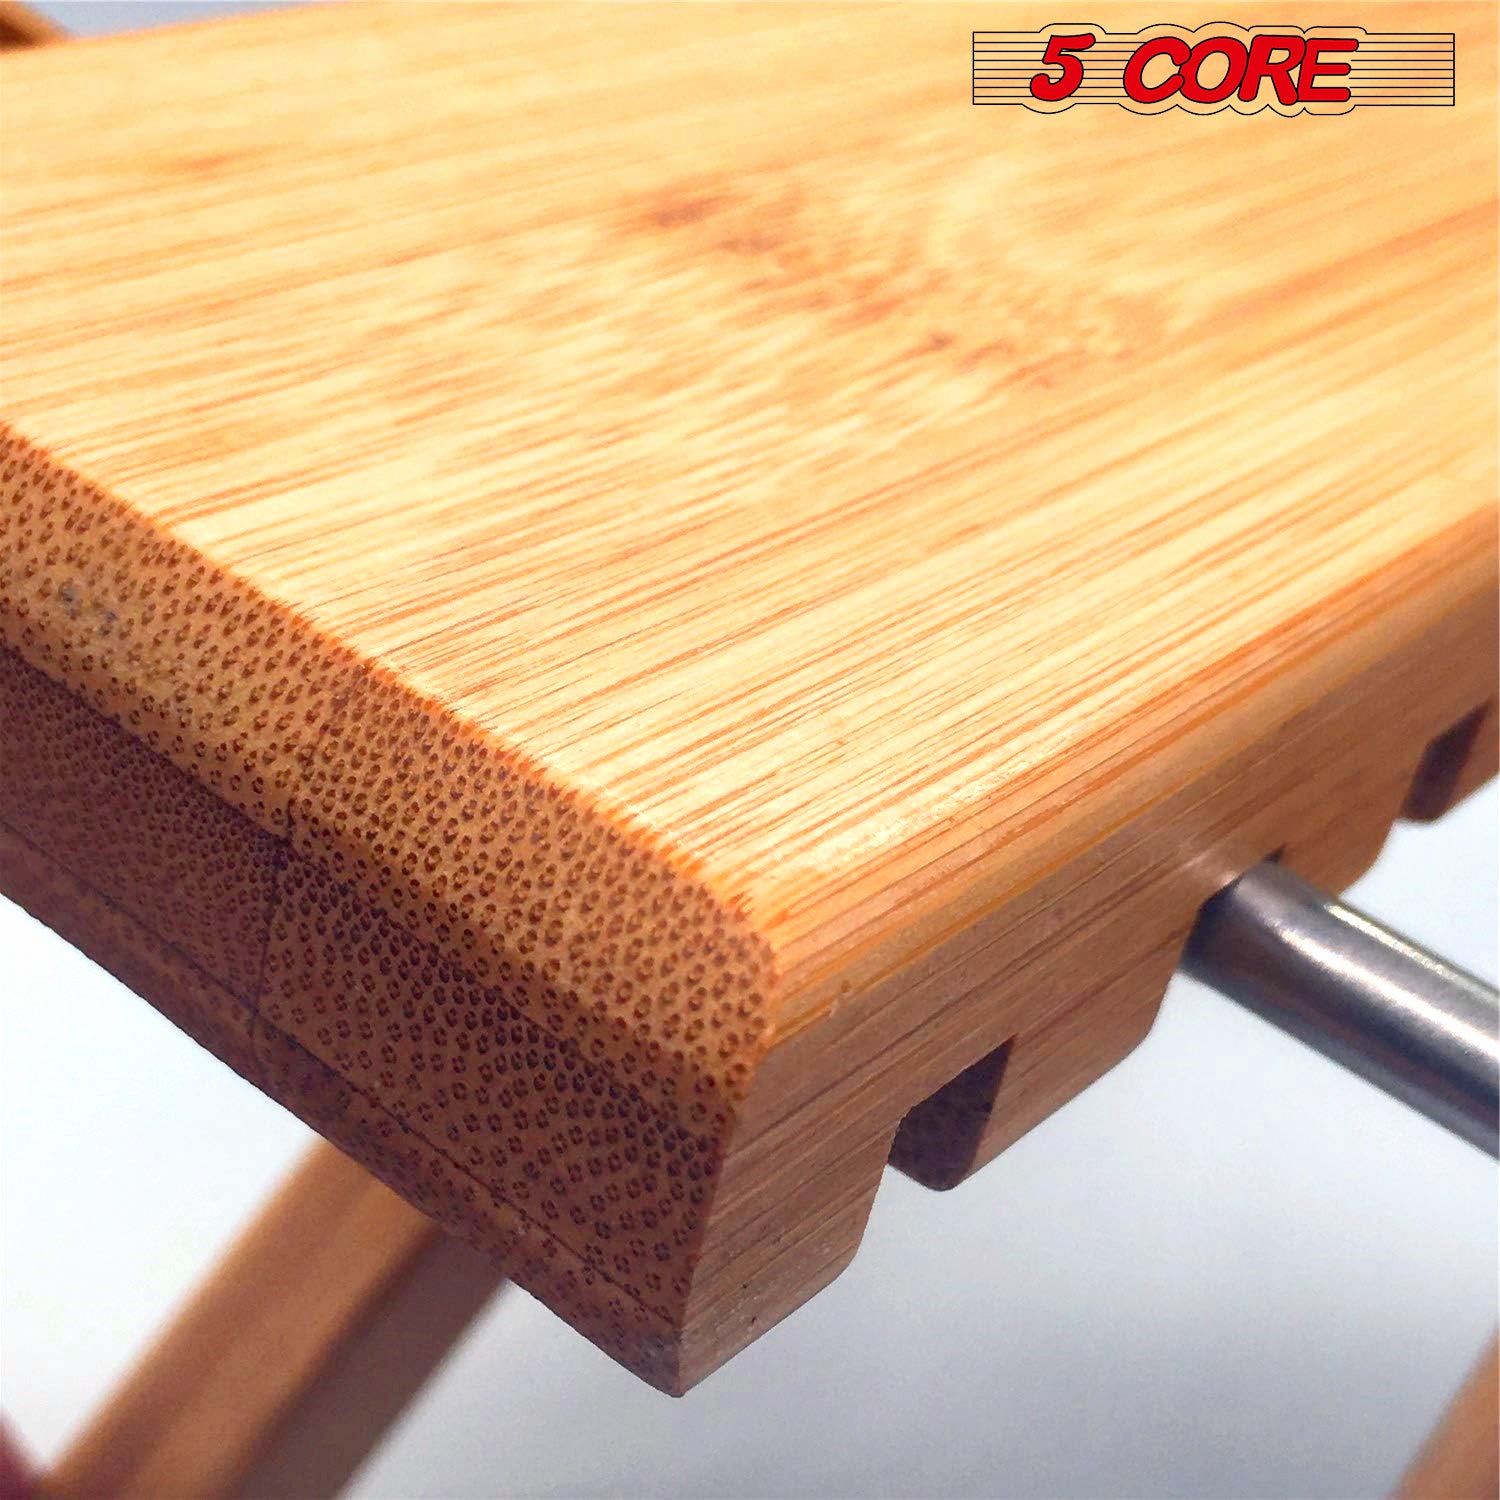 5 Core Guitar Foot Stool: Enhance Your Playing Comfort